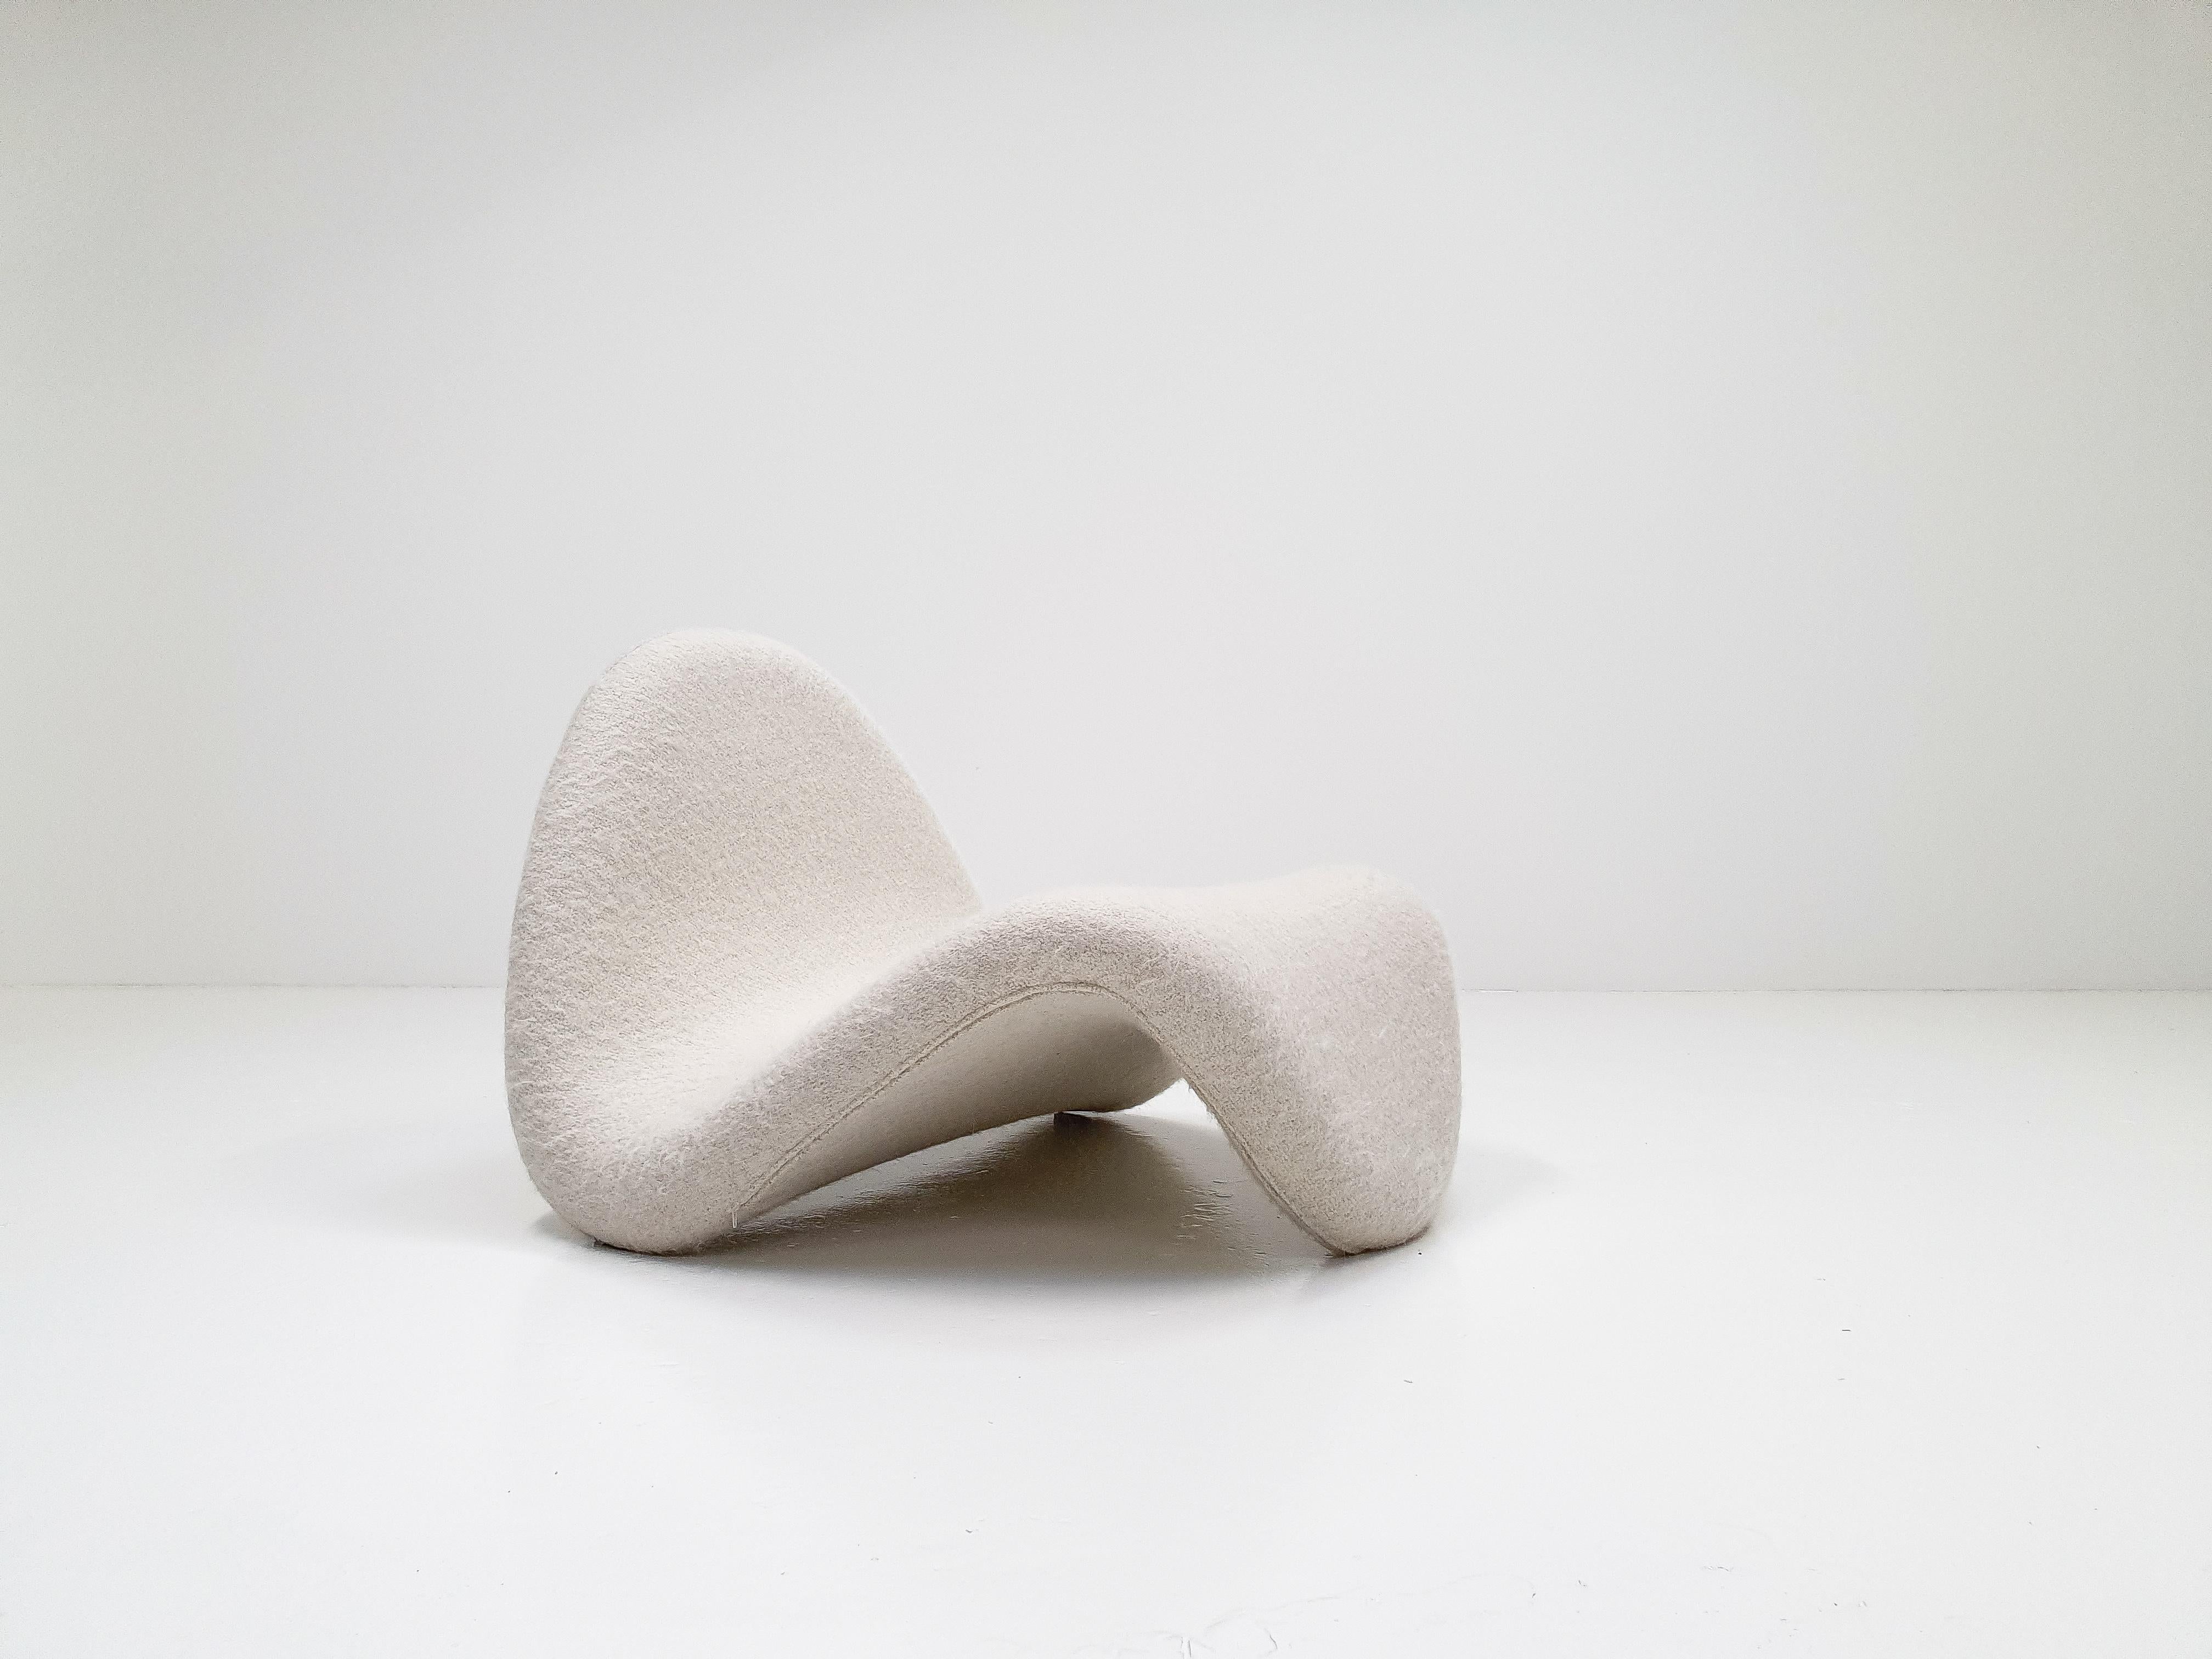 1st Edition Pierre Paulin Tongue Lounge Chair in Pierre Frey, Artifort, 1960s.

A 1st edition Pierre Paulin Tongue lounge chair in newly upholstered fluffy wool, mohair and alpaca Pierre Frey fabric.

Manufactured by Artifort, 1960s, now newly